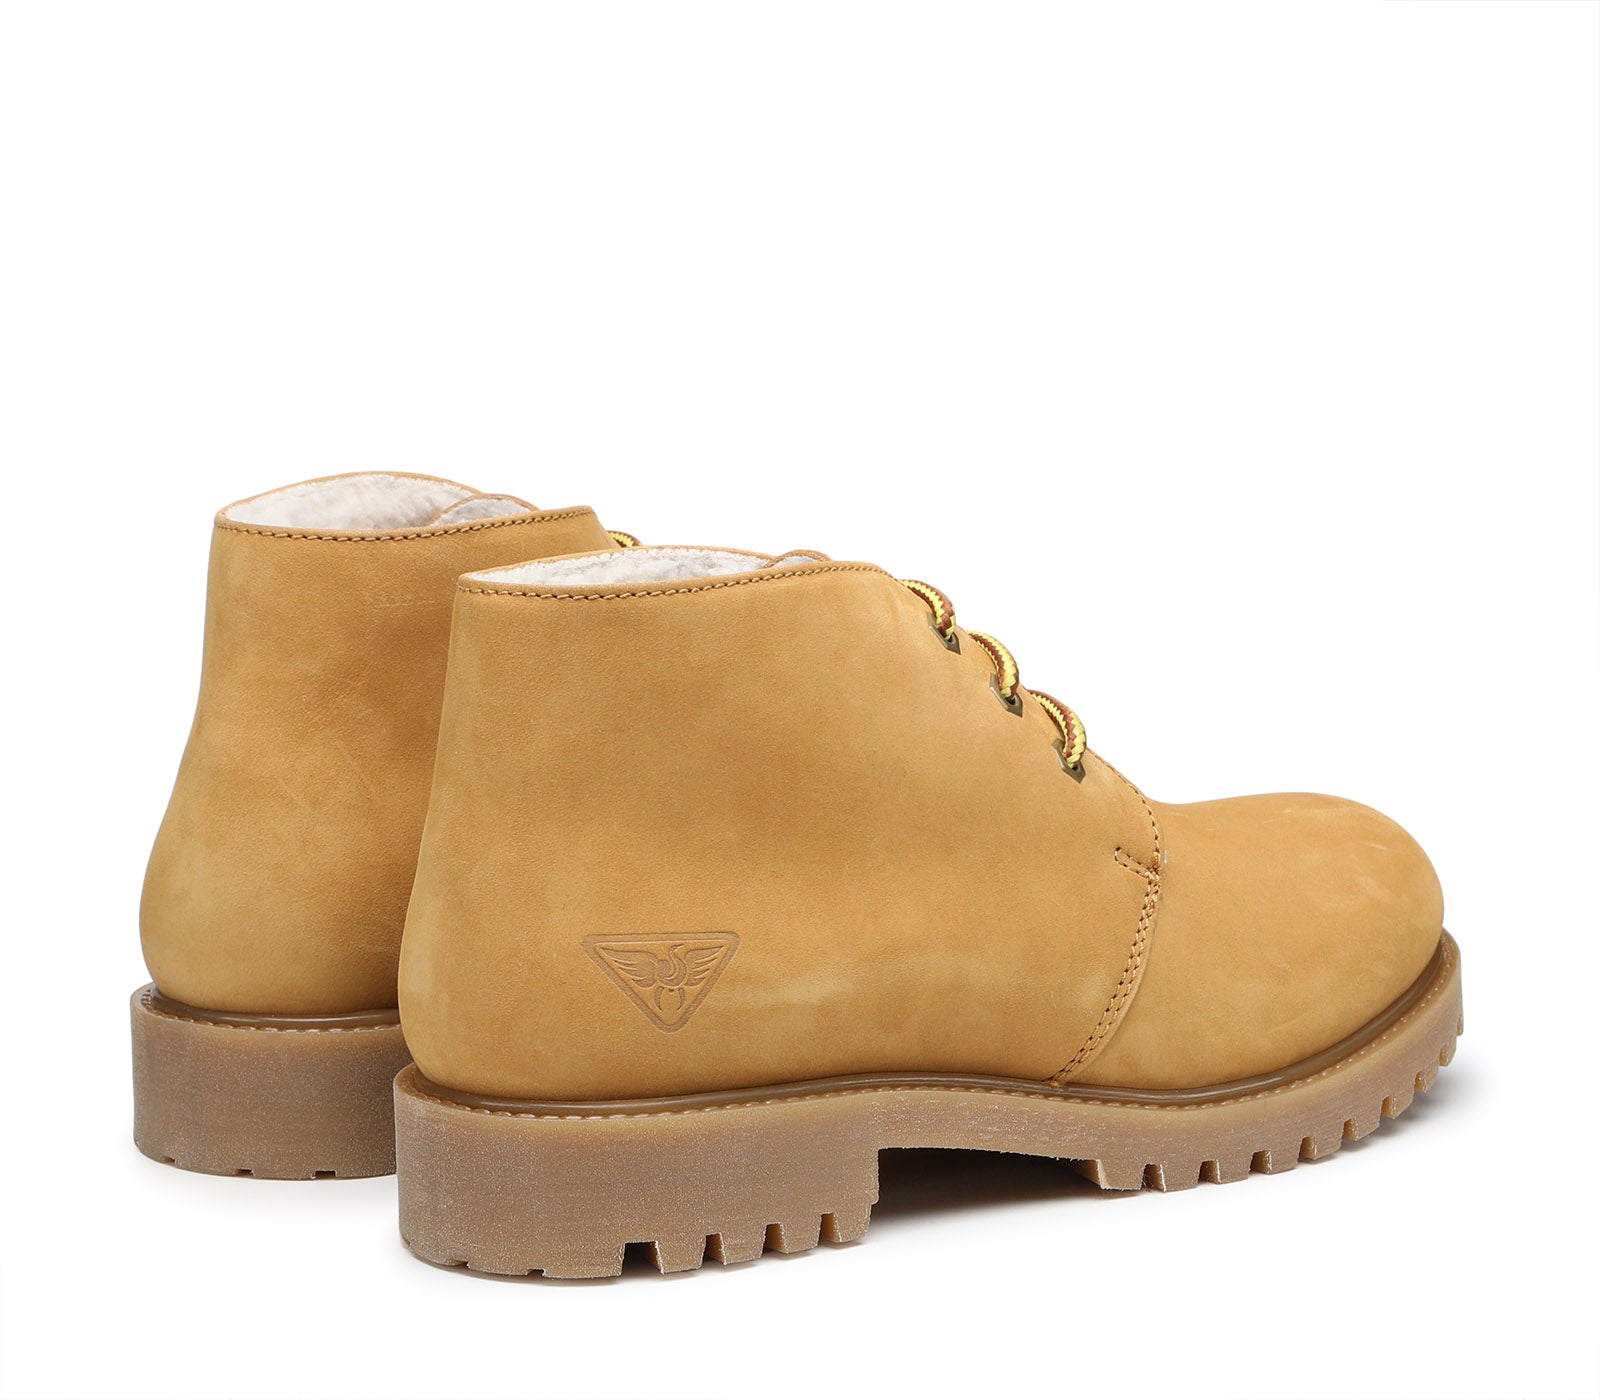 Men's leather boot Yellow